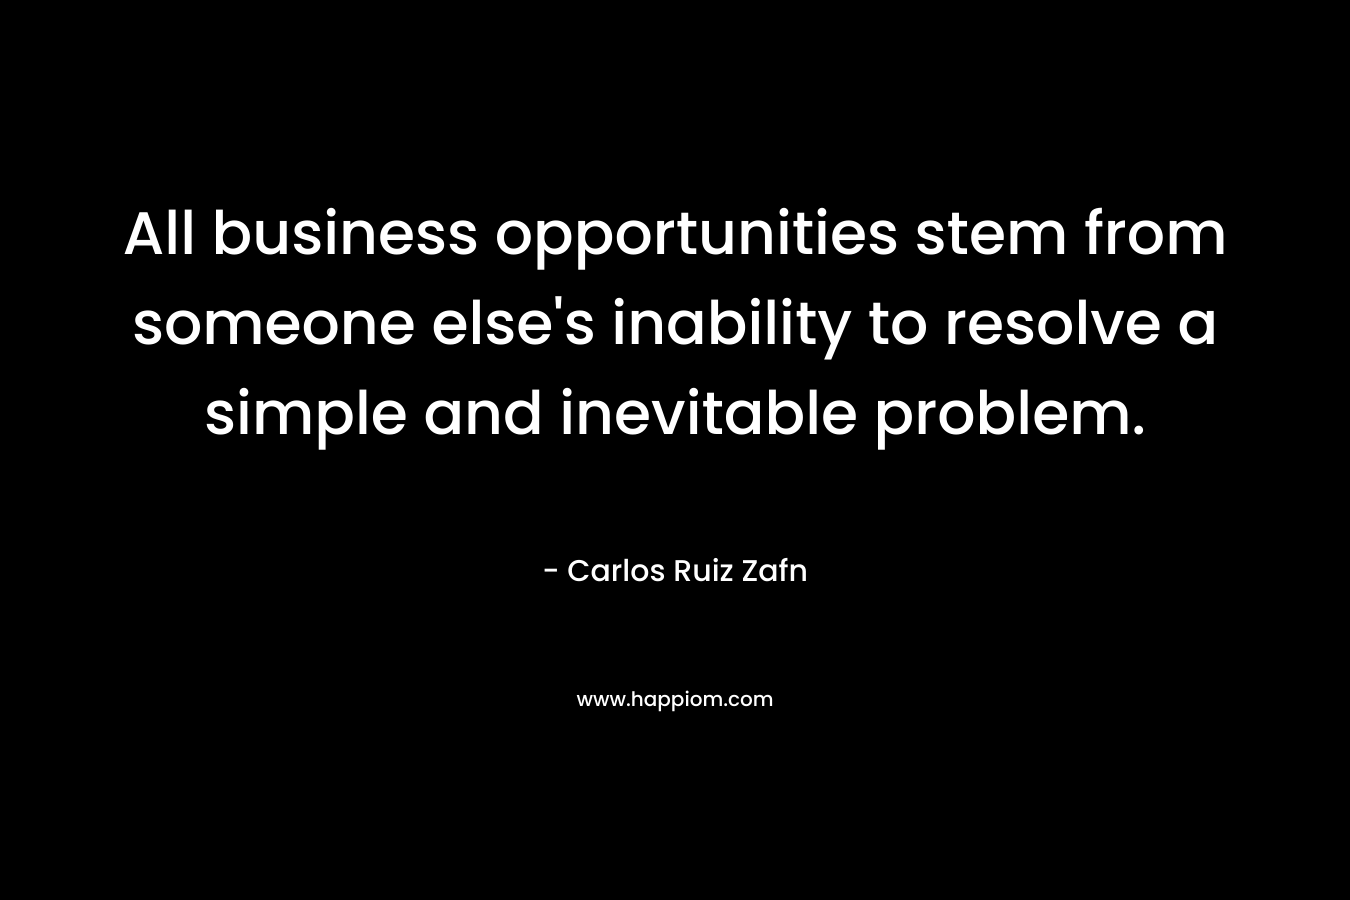 All business opportunities stem from someone else’s inability to resolve a simple and inevitable problem. – Carlos Ruiz Zafn